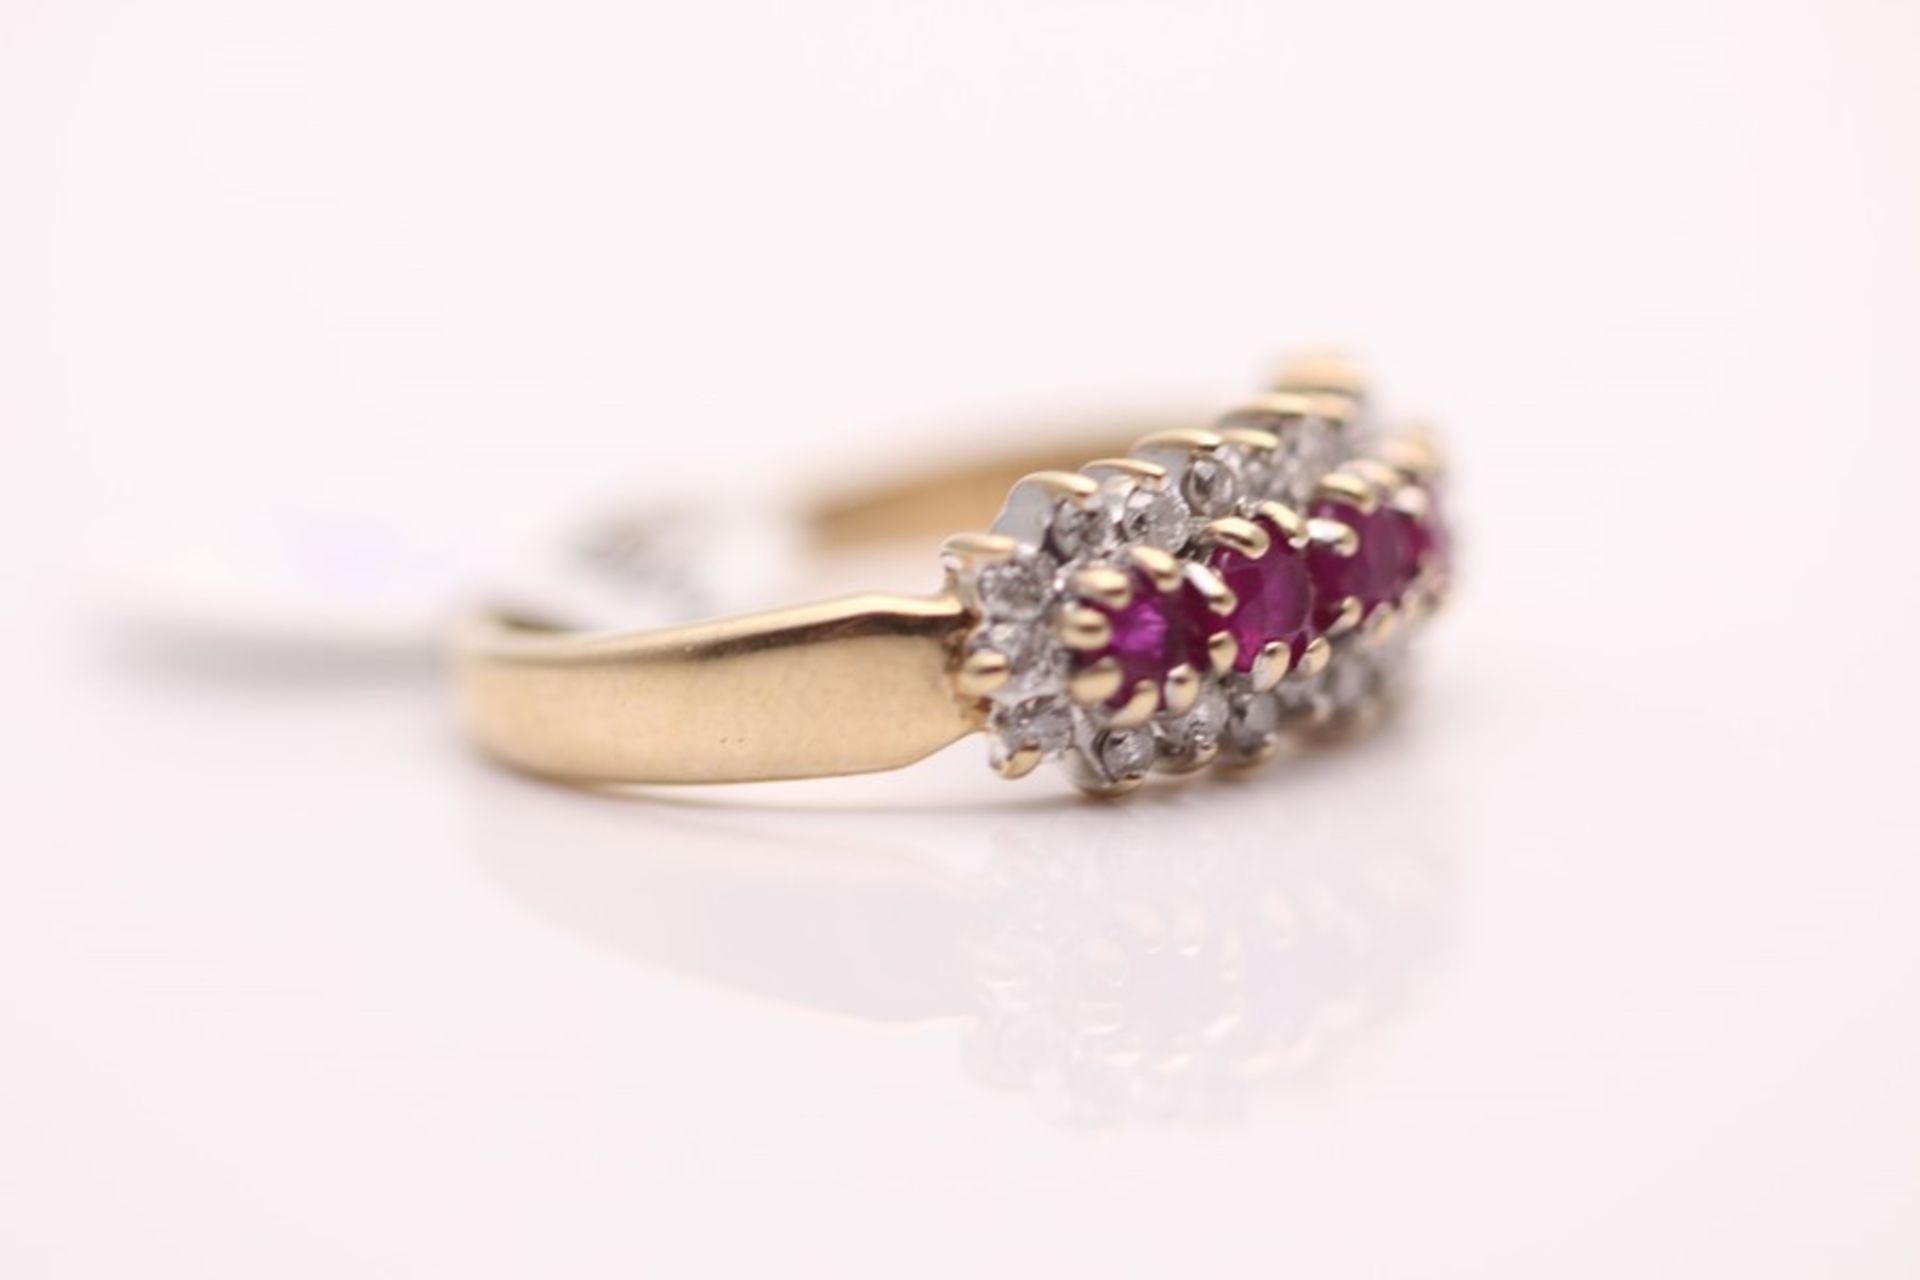 9CT YELLOW GOLD LADIES DIAMOND AND SPINEL RING - Image 2 of 4